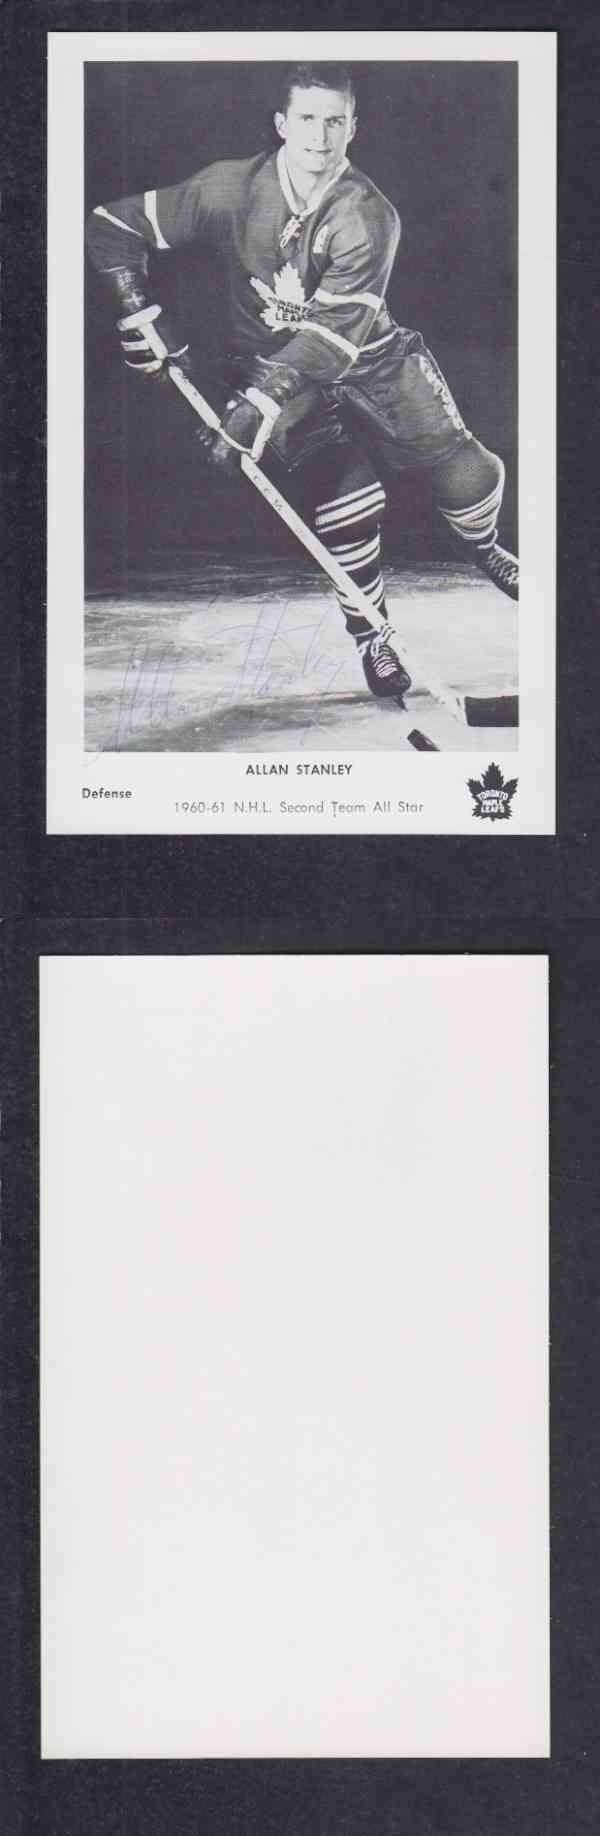 1960 'S TORONTO MAPLE LEAFS A.STANLEY  AUTOGRAPHED POST CARD photo